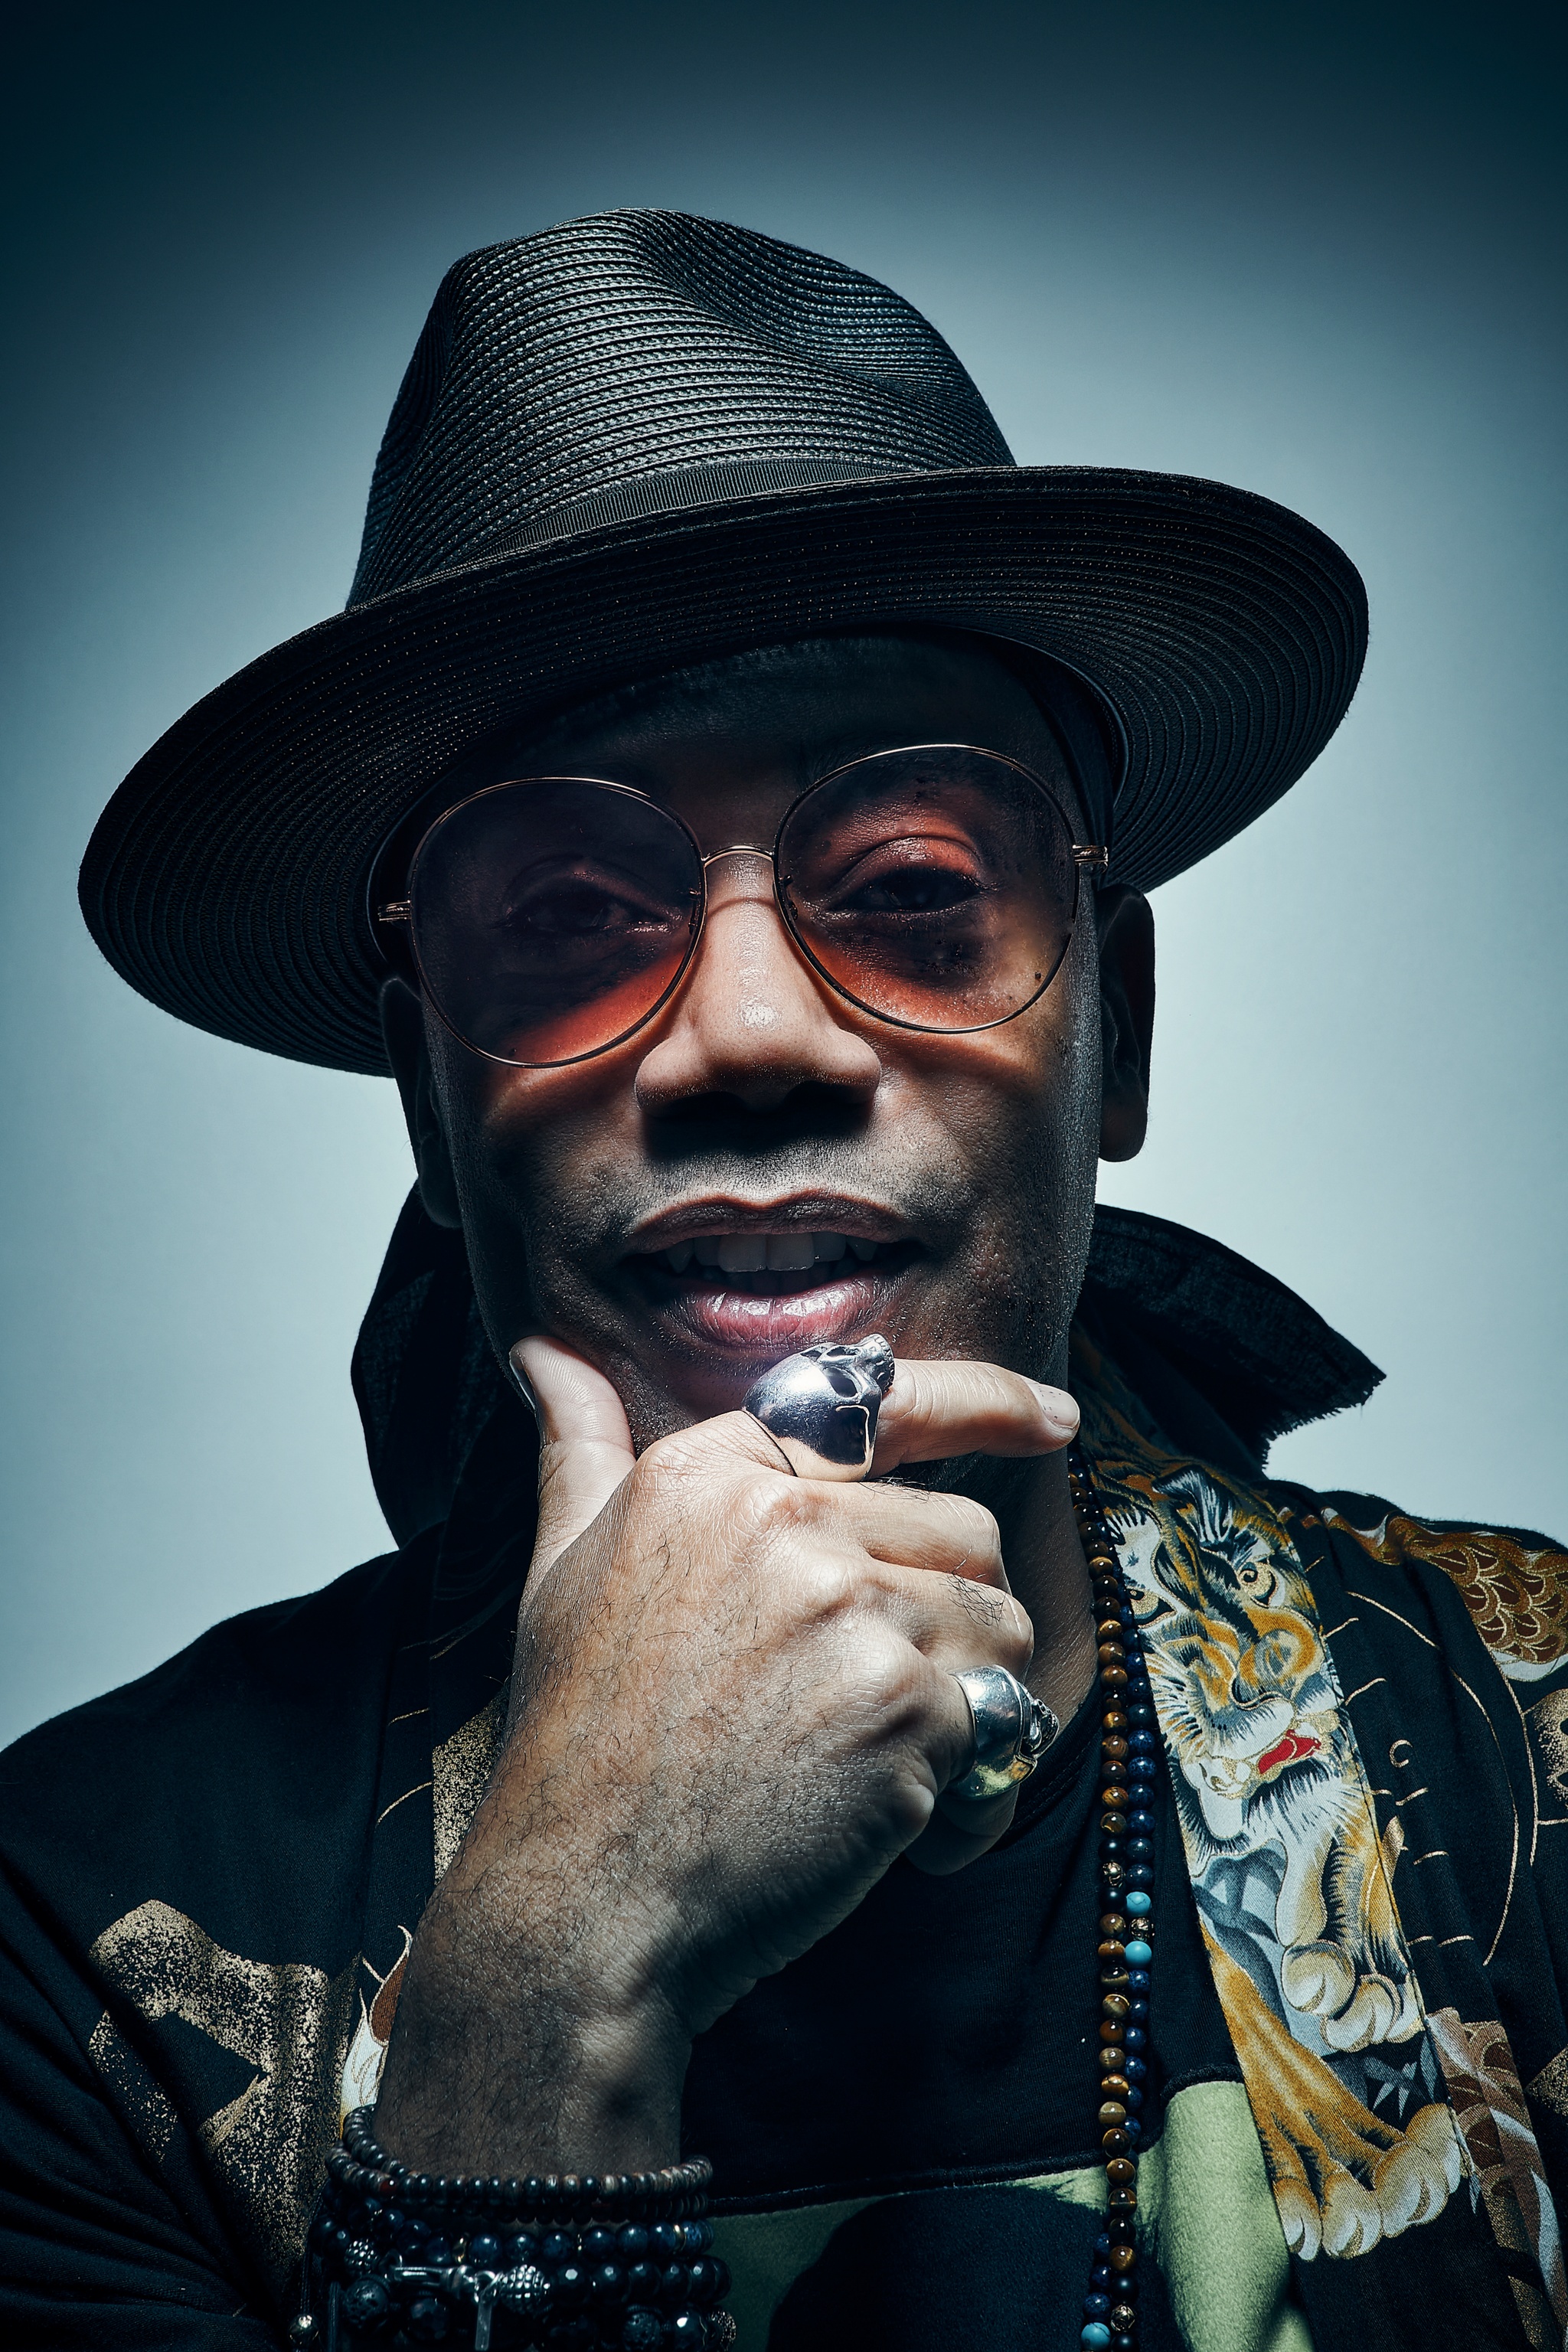 A Black man wearing orange sunglasses and a wide brimmed hat holds one hand to his chin. He wears two large rings on his pointer finger and pinky and looks directly at us from under the brim of his hat.